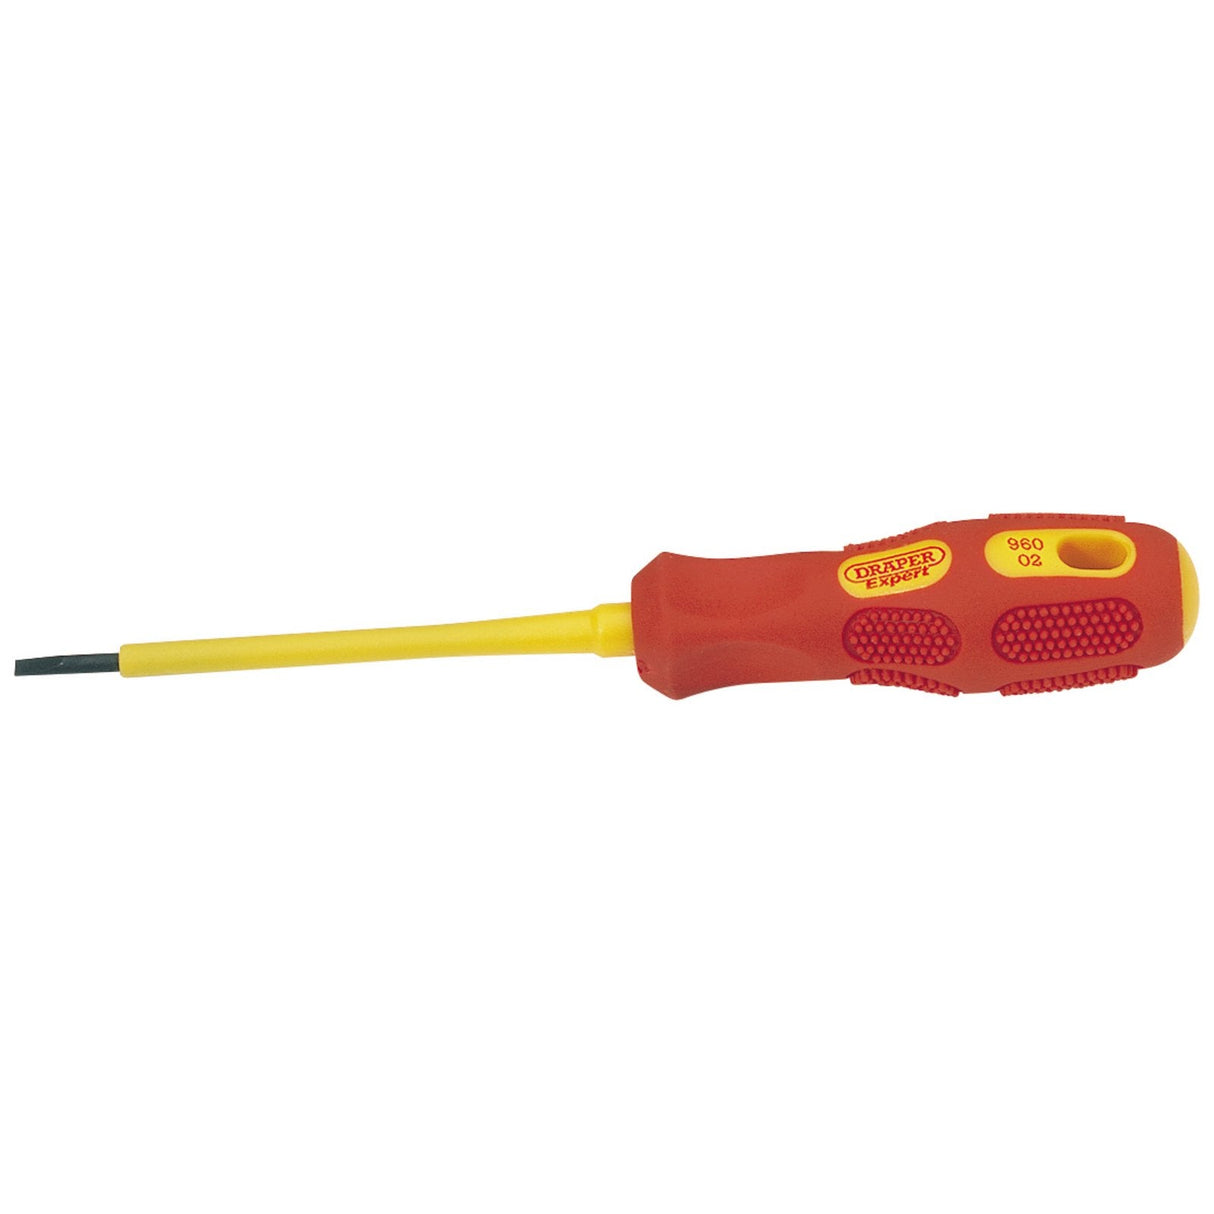 Draper Vde Approved Fully Insulated Plain Slot Screwdriver, 2.5 X 75mm (Sold Loose) - 960B - Farming Parts